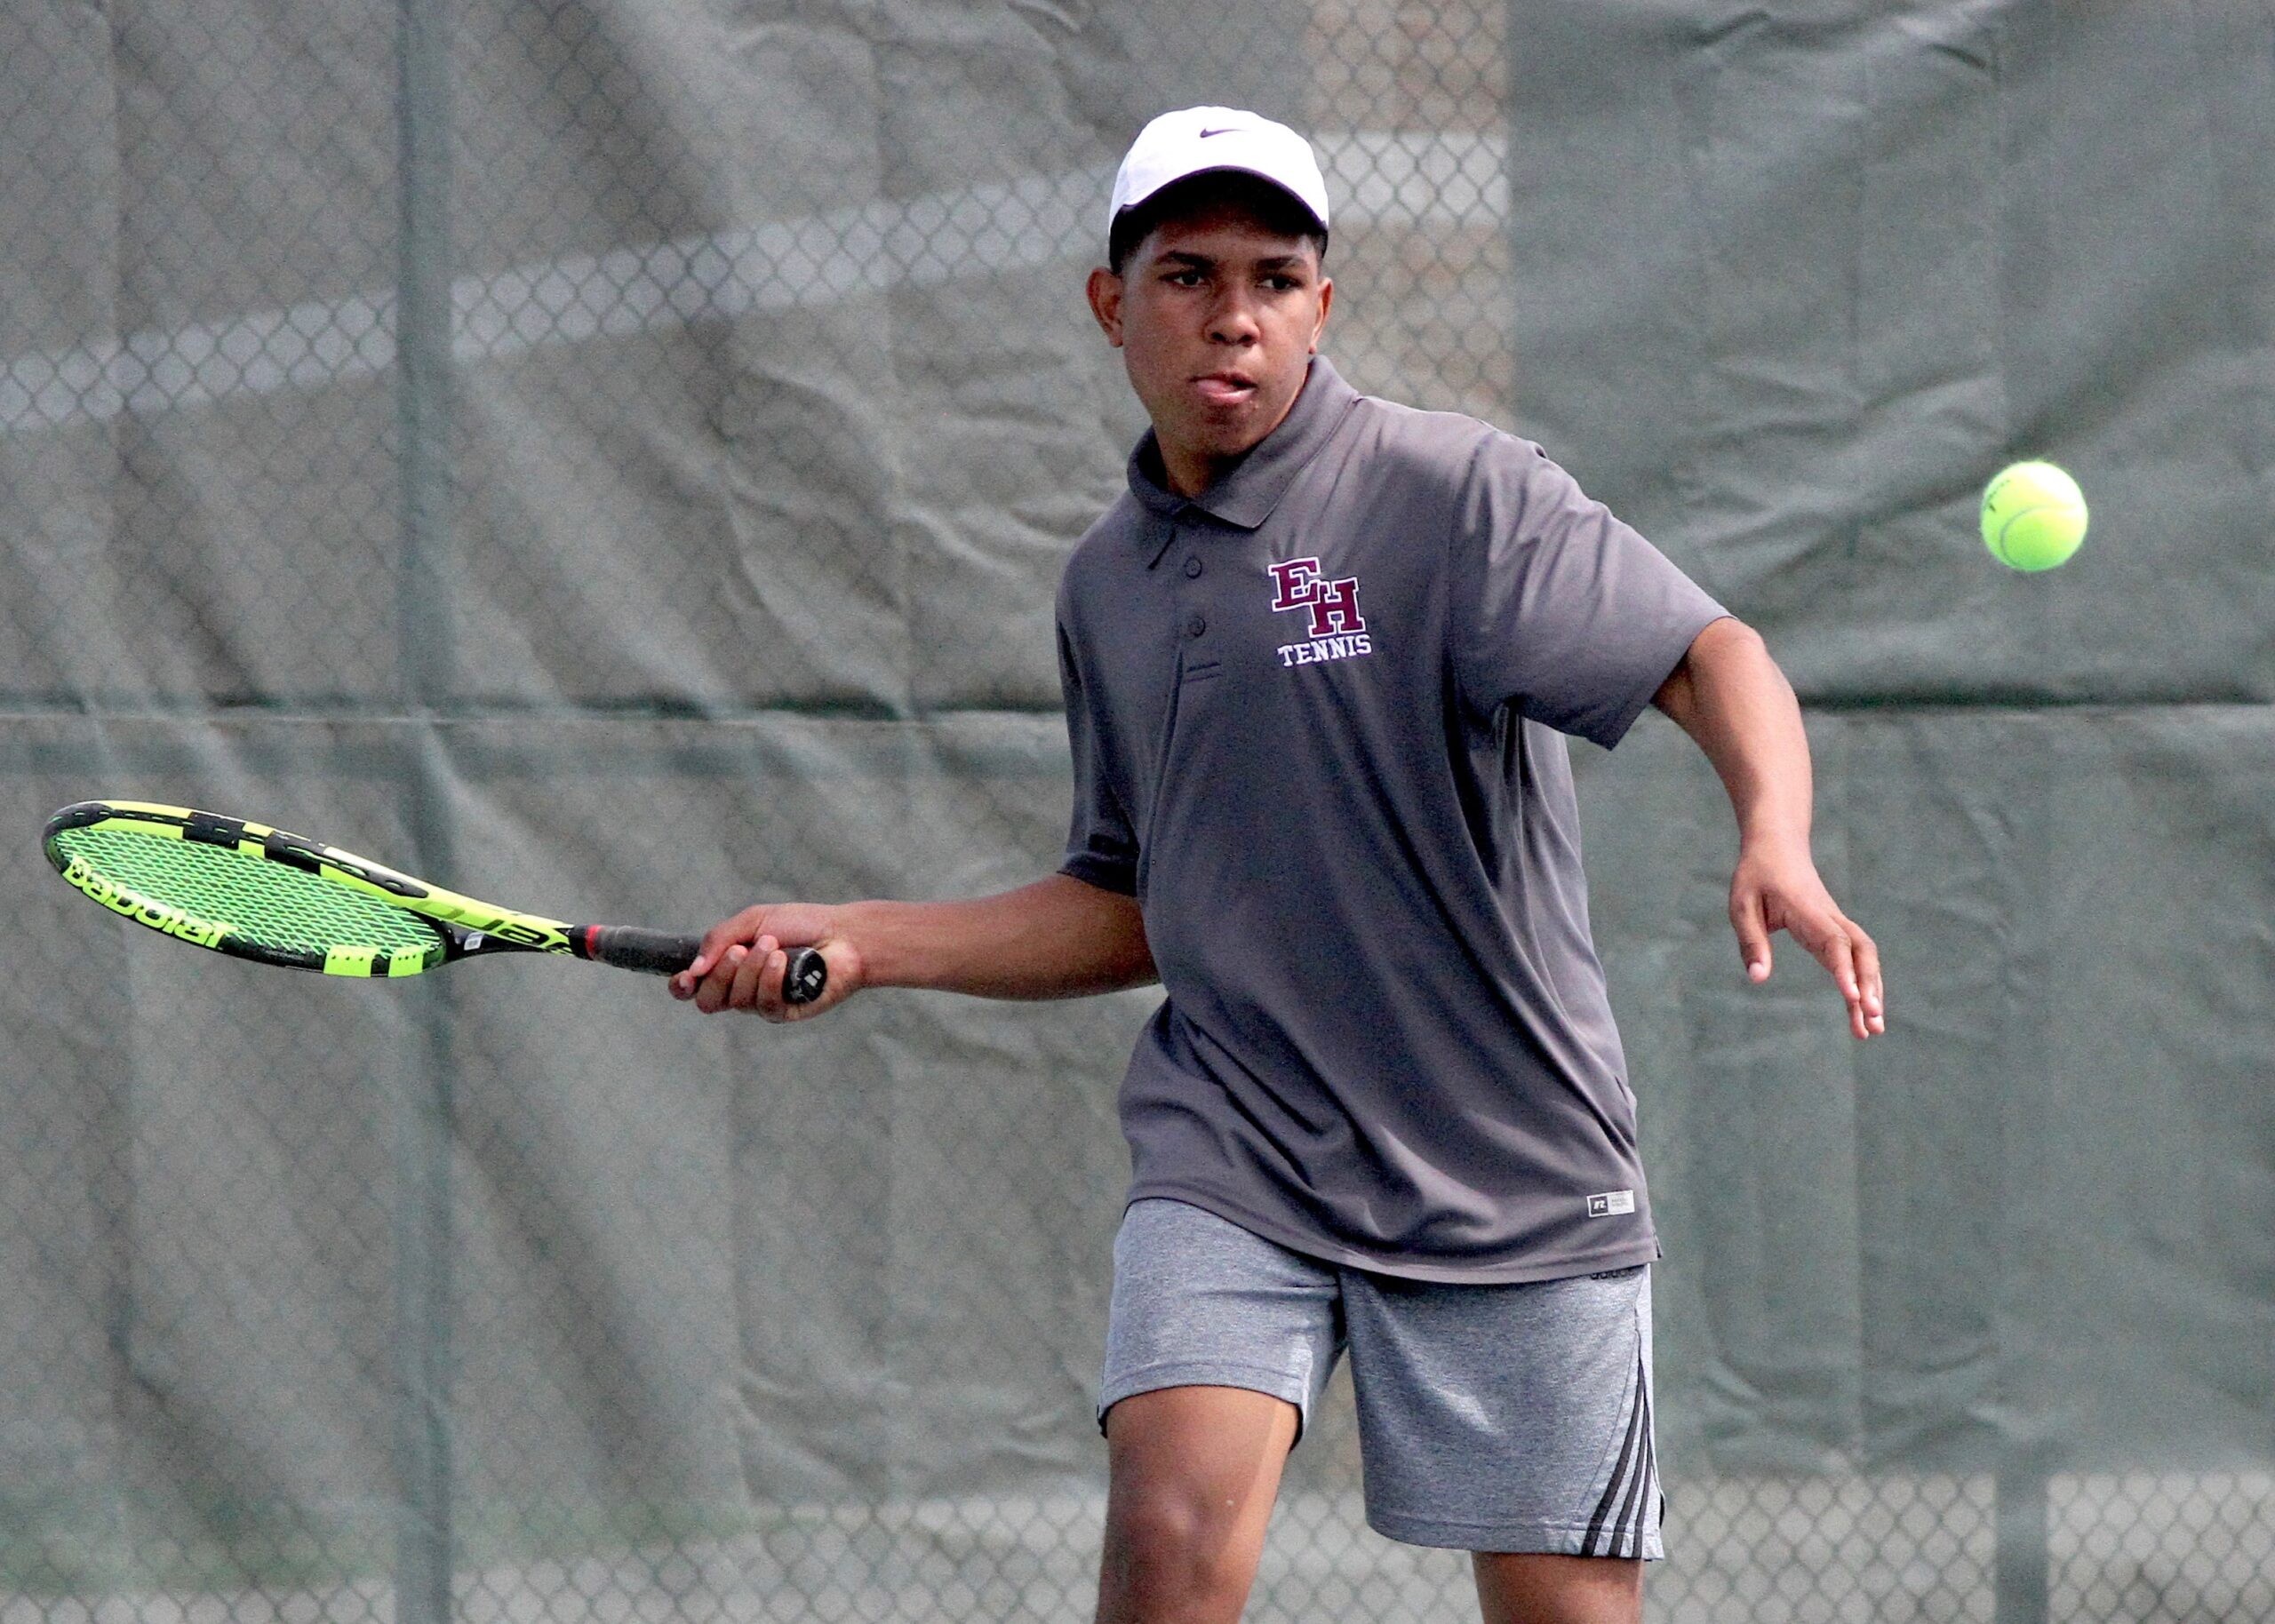 East Hampton sophomore Miguel Garcia, with classmate Cameron Mitchell, rallied back for third in the Division IV doubles tournament. DESIRÉE KEEGAN